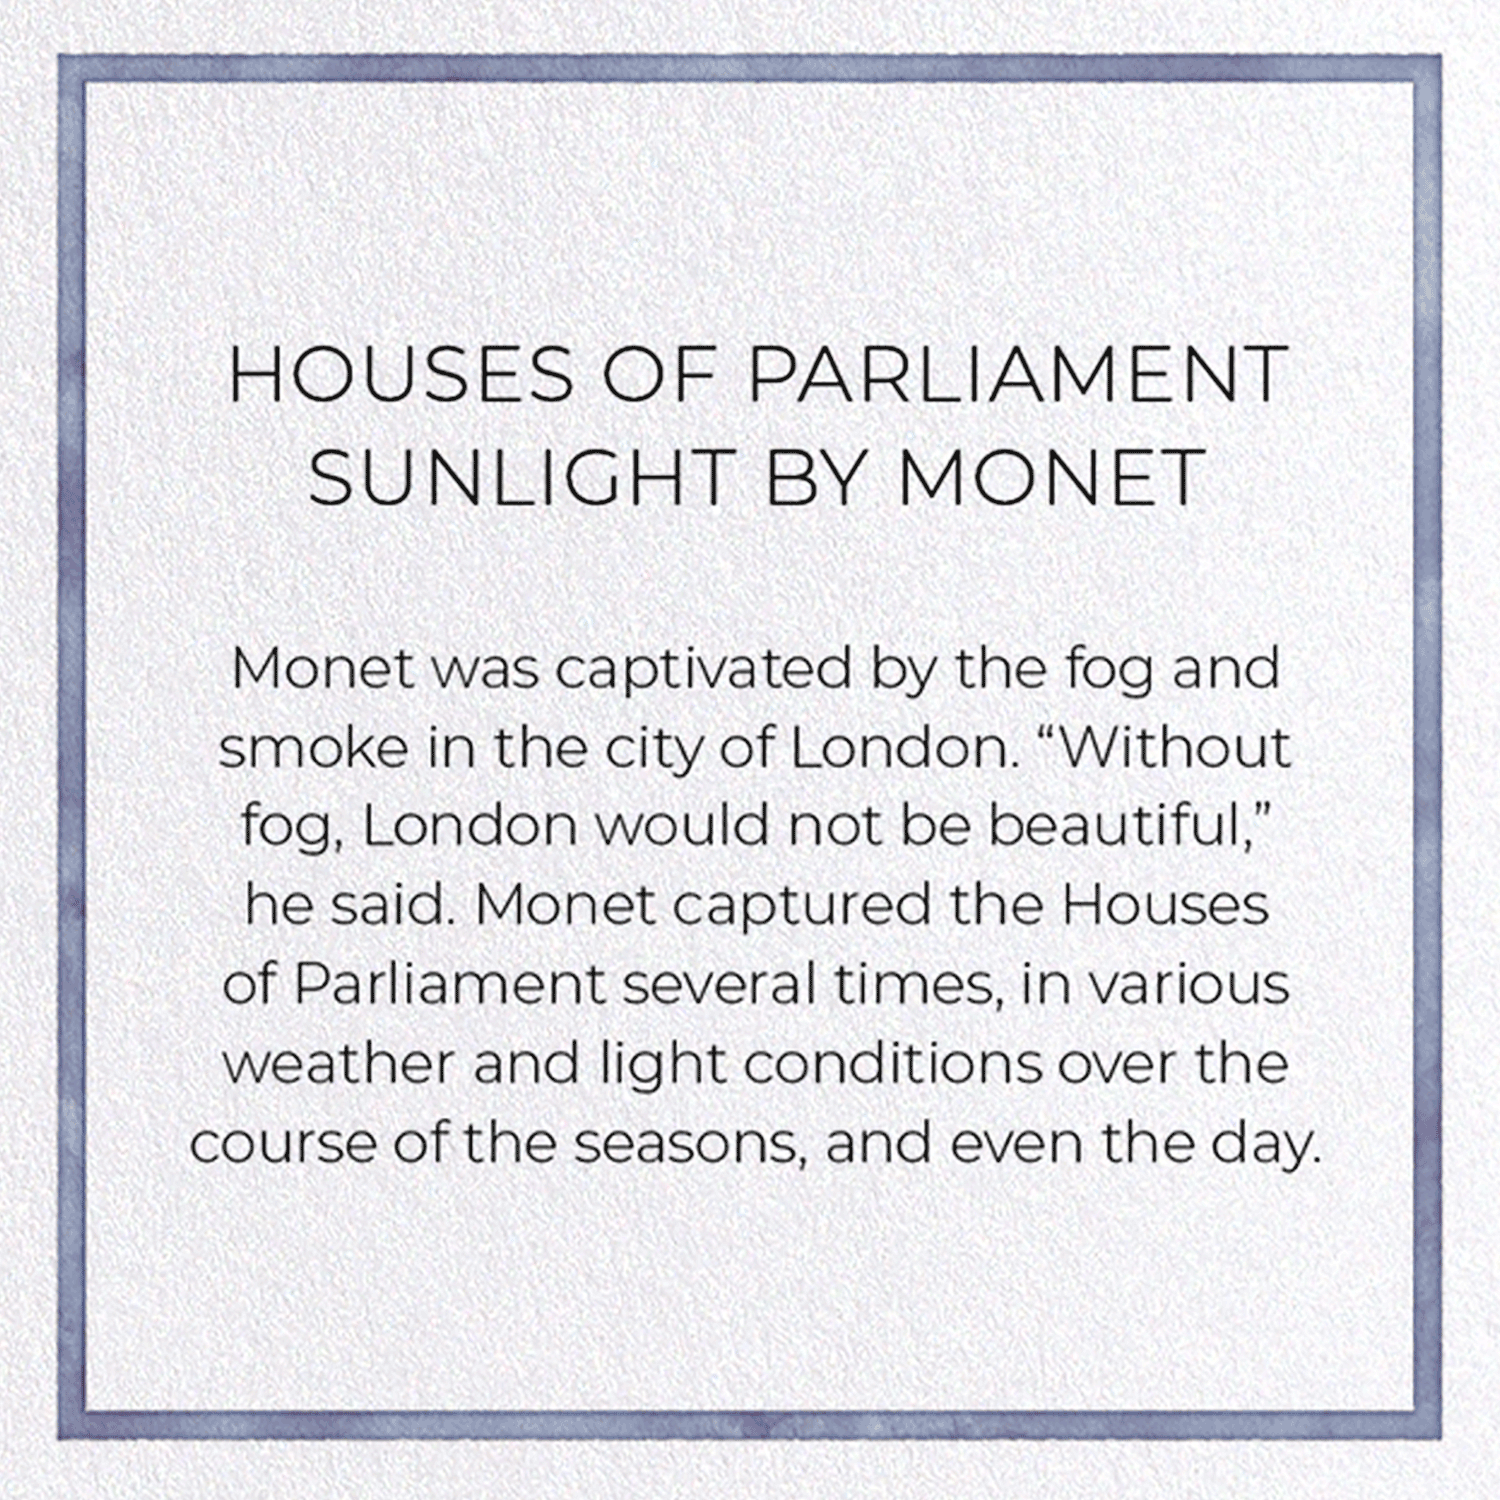 HOUSES OF PARLIAMENT SUNLIGHT BY MONET